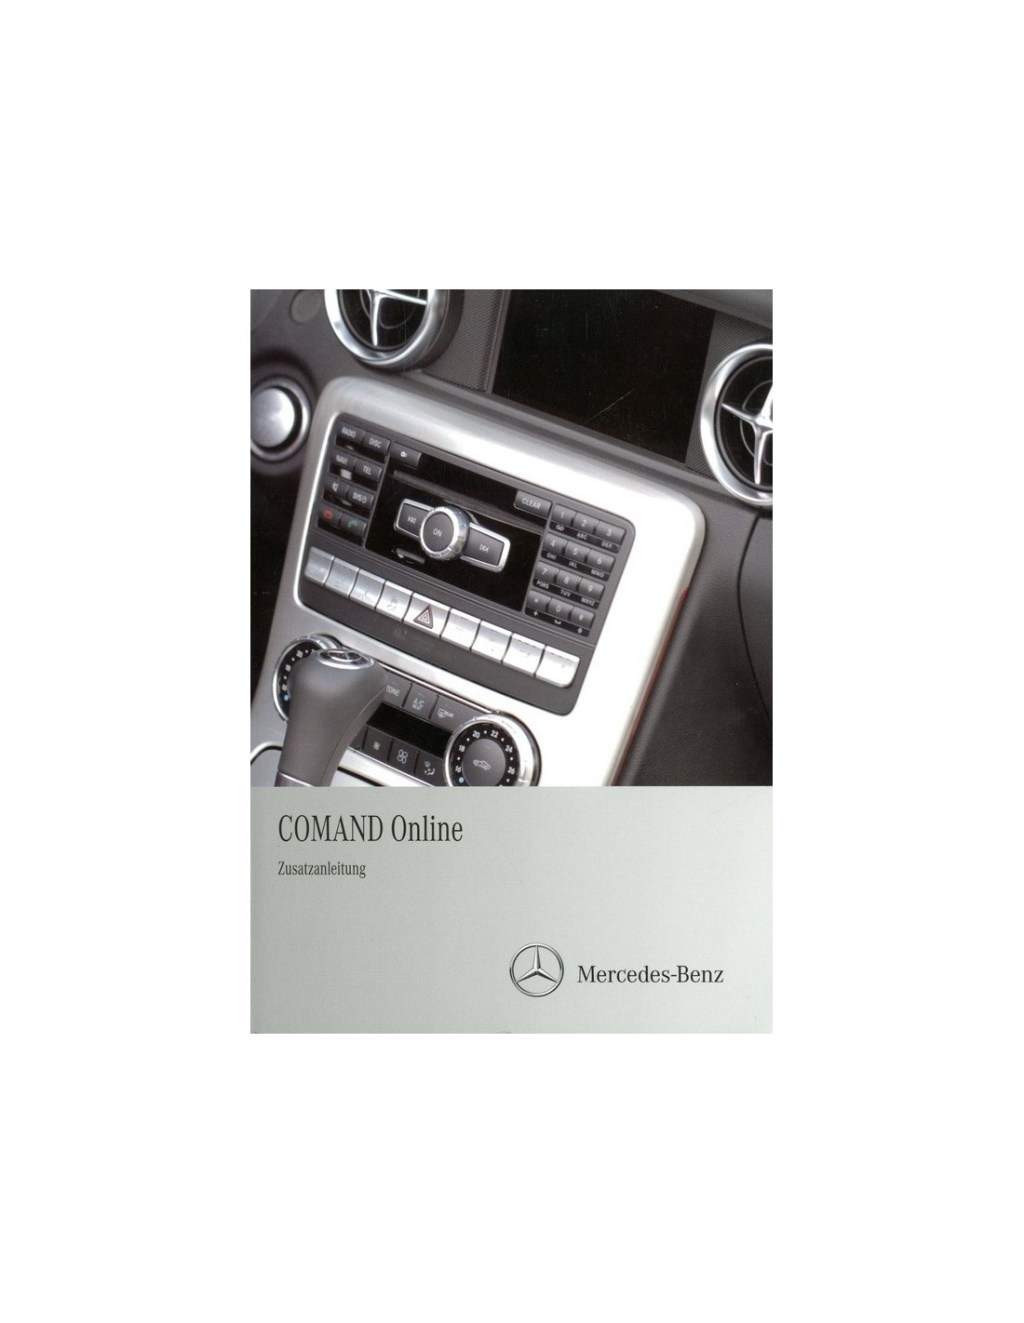 Picture of: MERCEDES BENZ COMAND ONLINE OWNER’S MANUAL